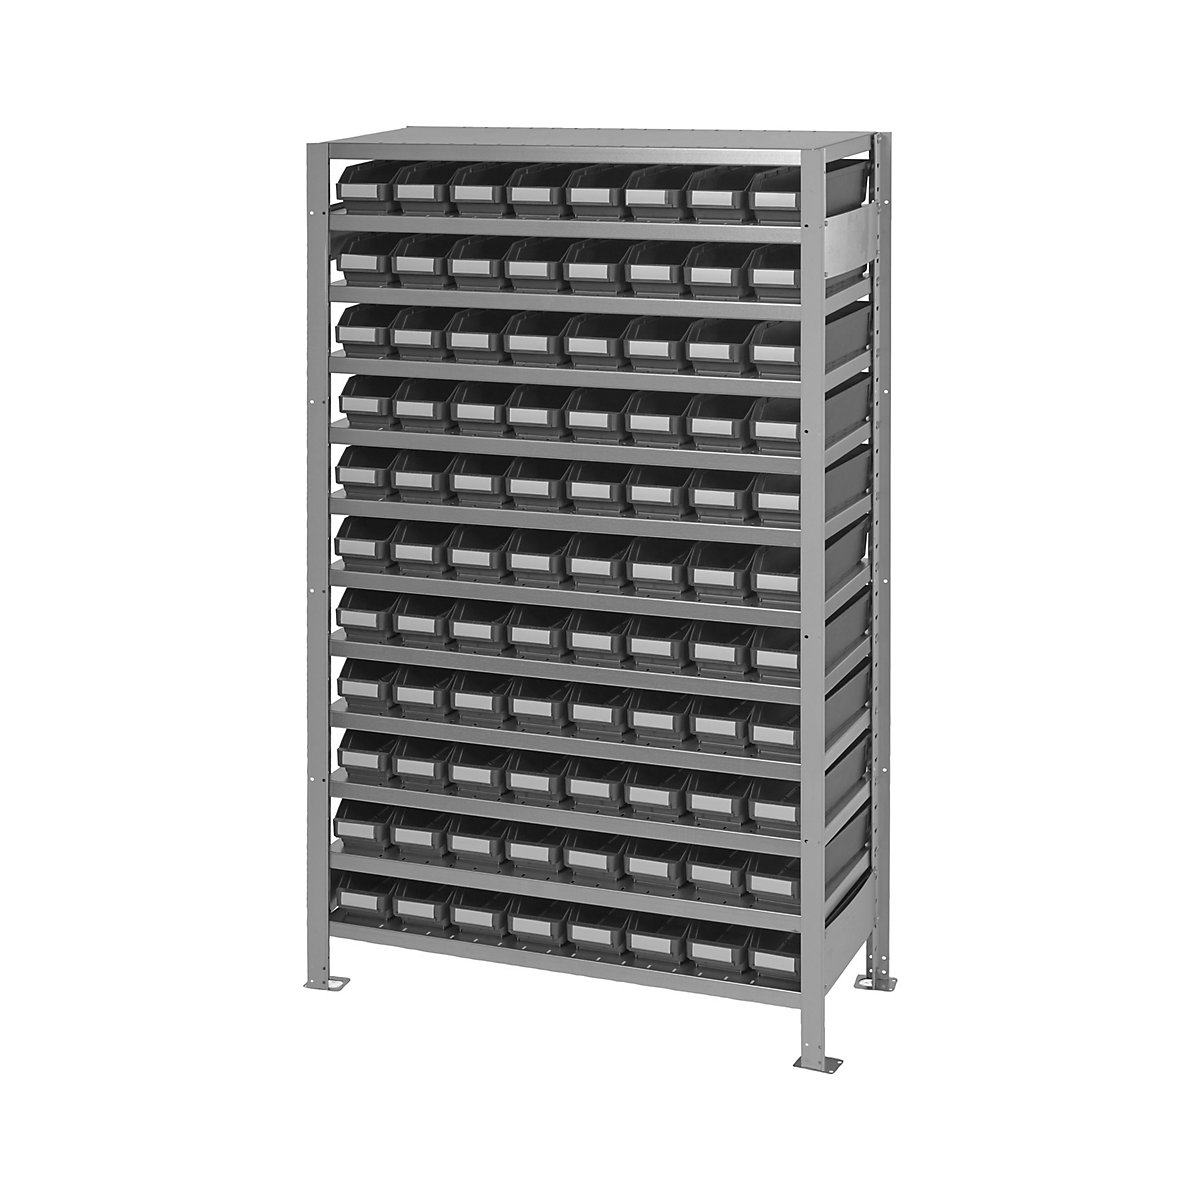 STEMO – Boltless shelving unit, with ESD open fronted storage bins, HxWxD 1790 x 1000 x 400 mm, 88 open fronted storage bins